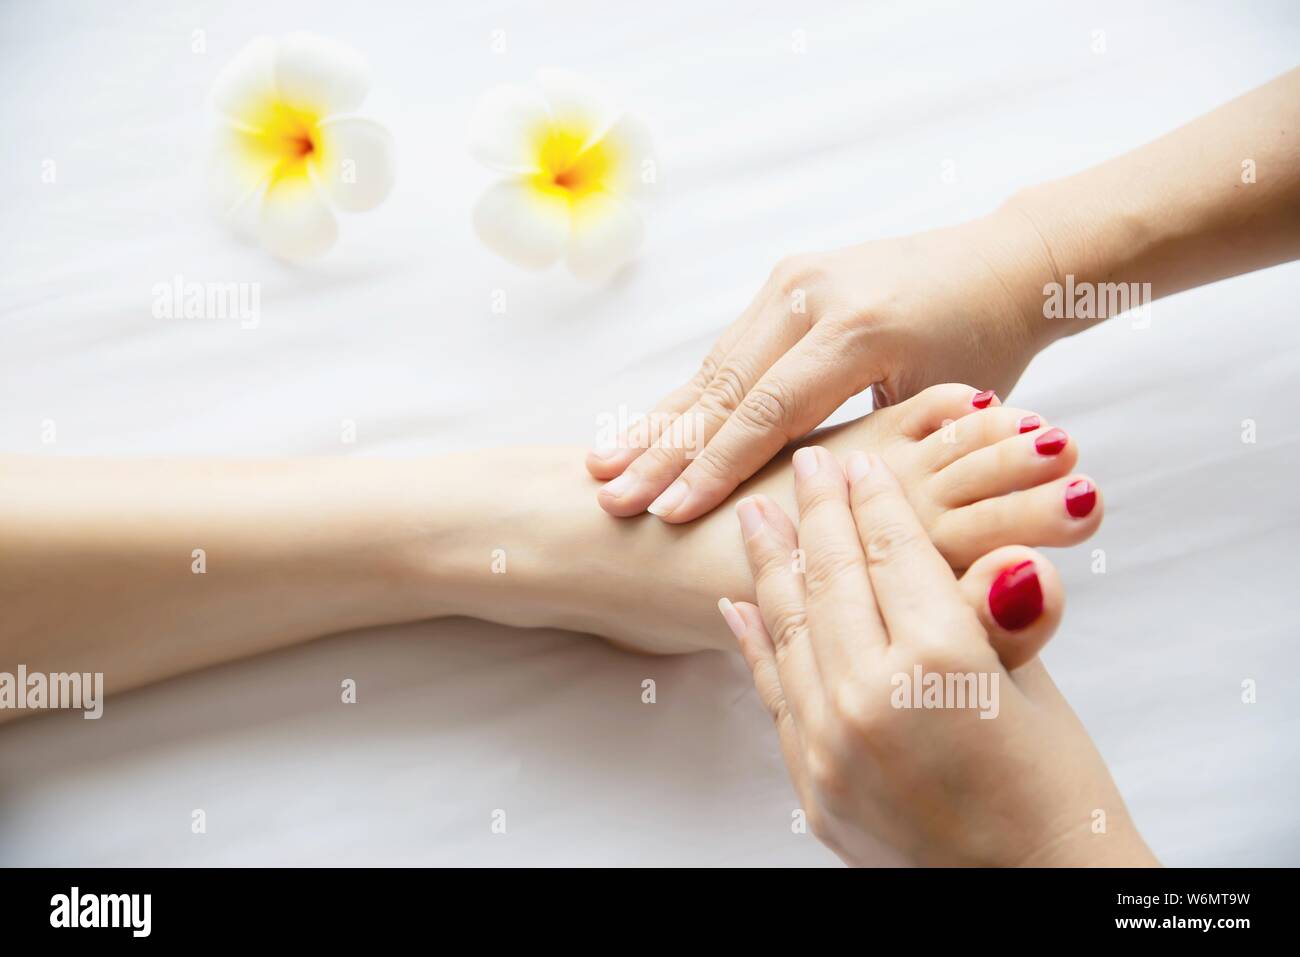 Woman receiving foot massage service from masseuse close up at hand and foot - relax in foot massage therapy service concept Stock Photo